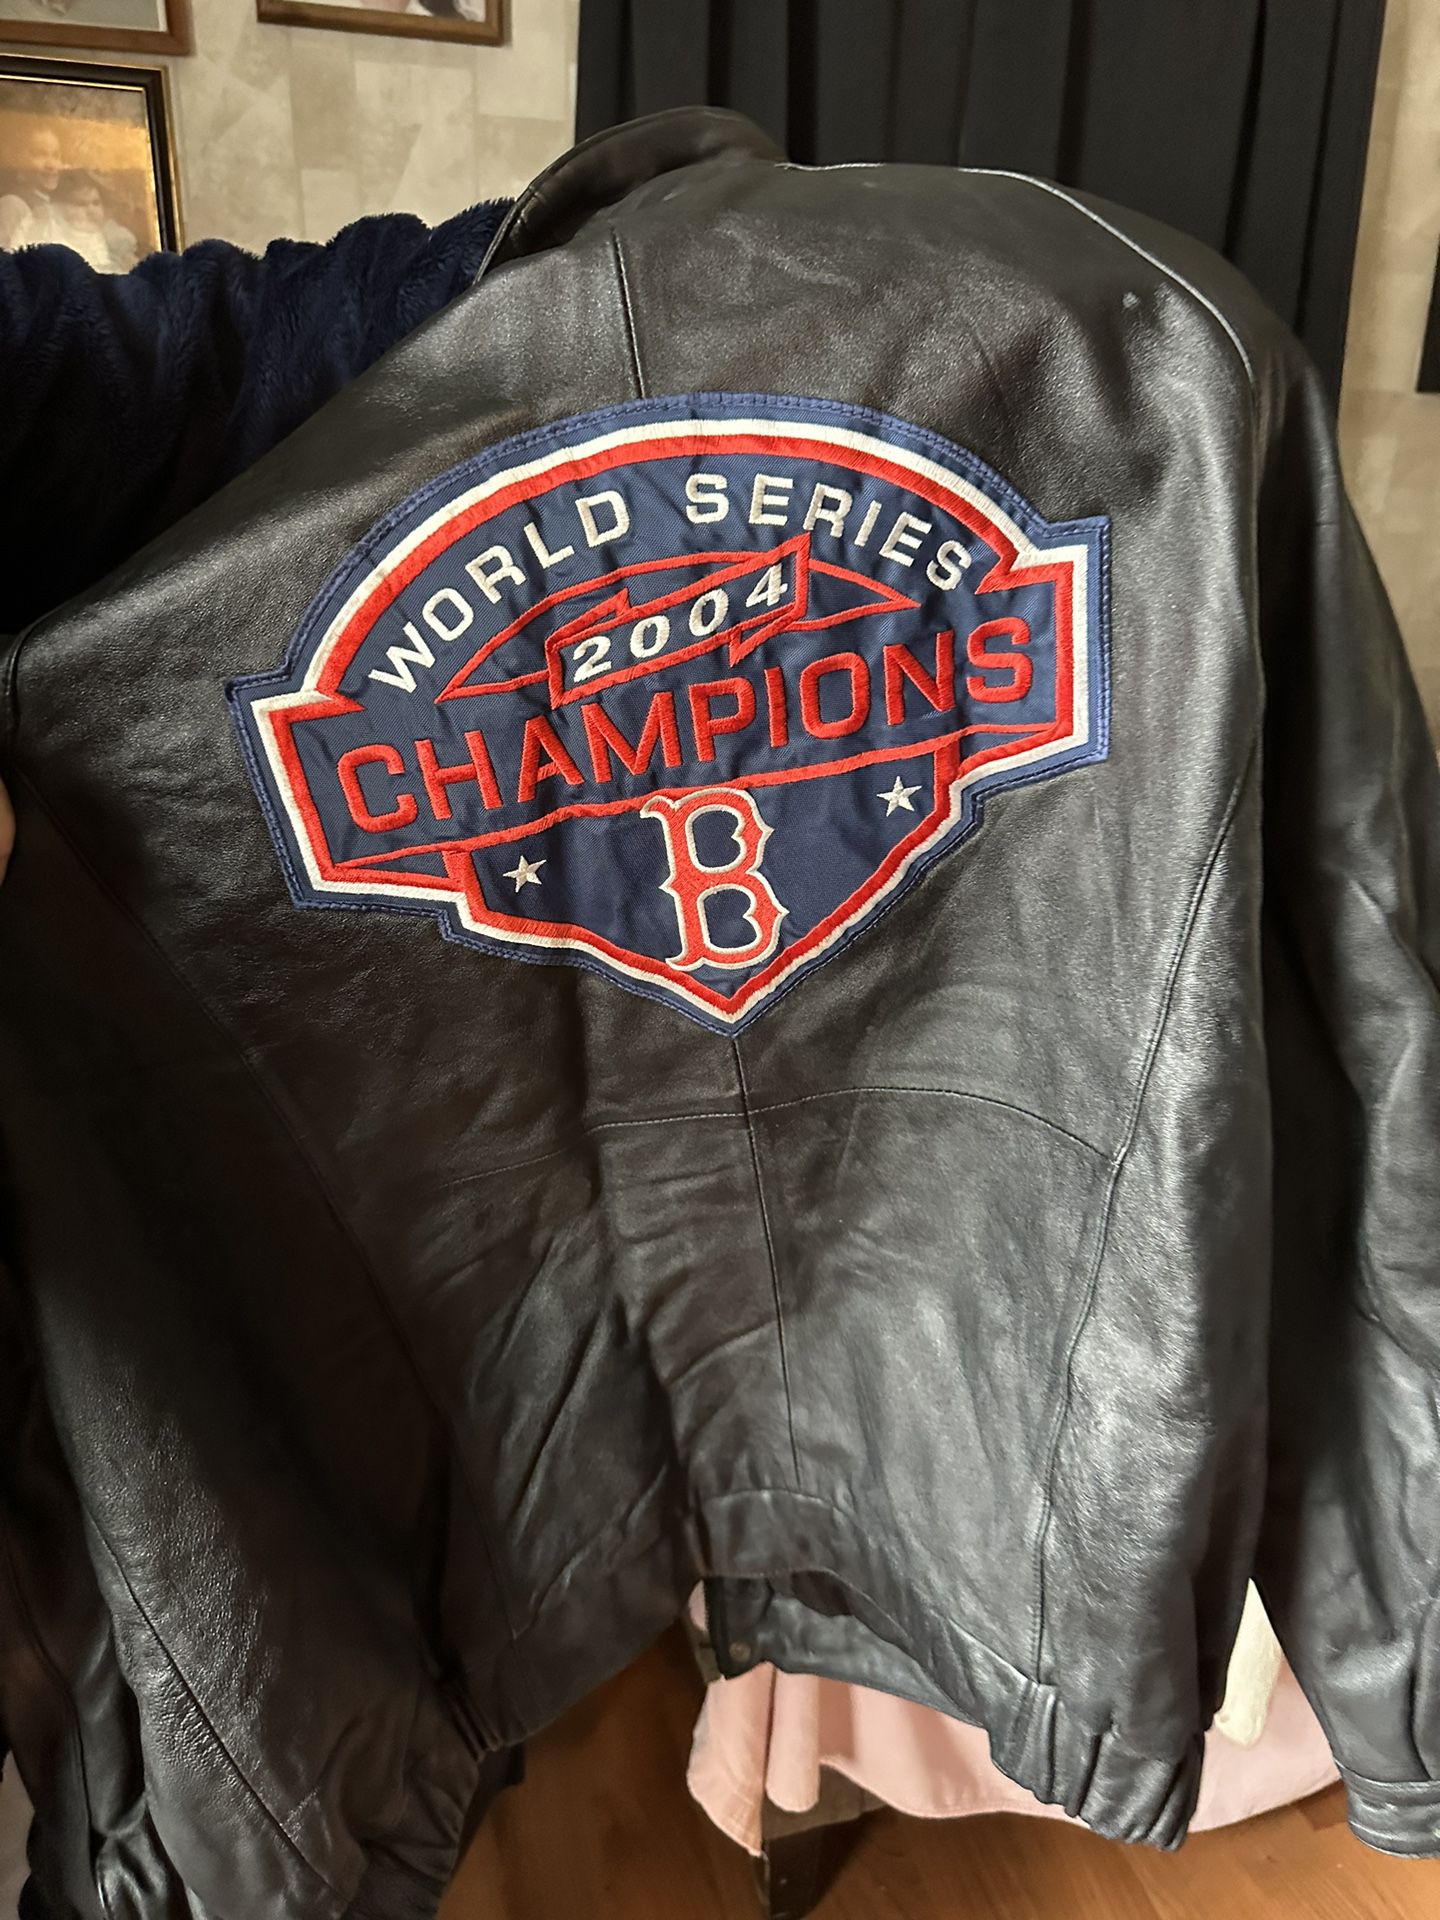 Large Red Sox Leather Jacket 